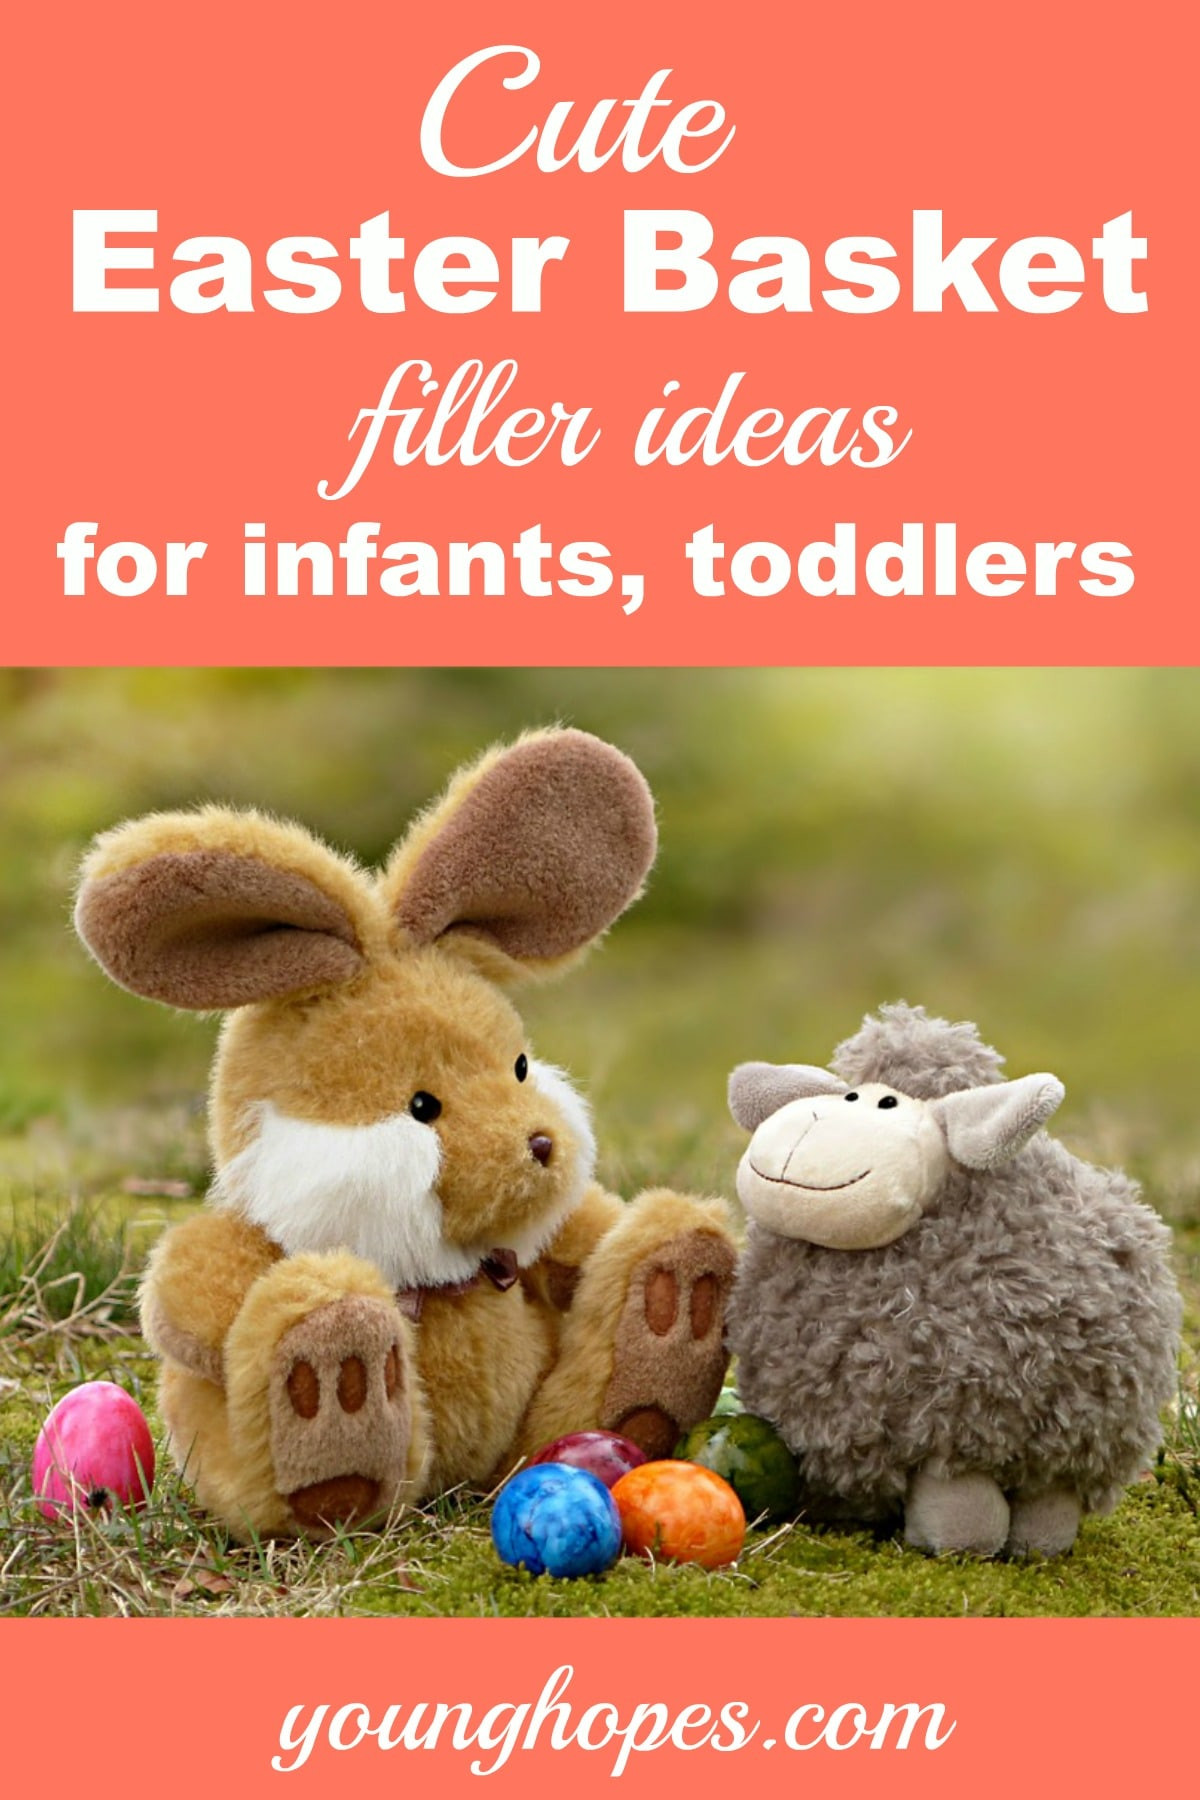 Cute Ideas For Easter
 Cute Easter Basket Filler Ideas for Infants and Toddlers